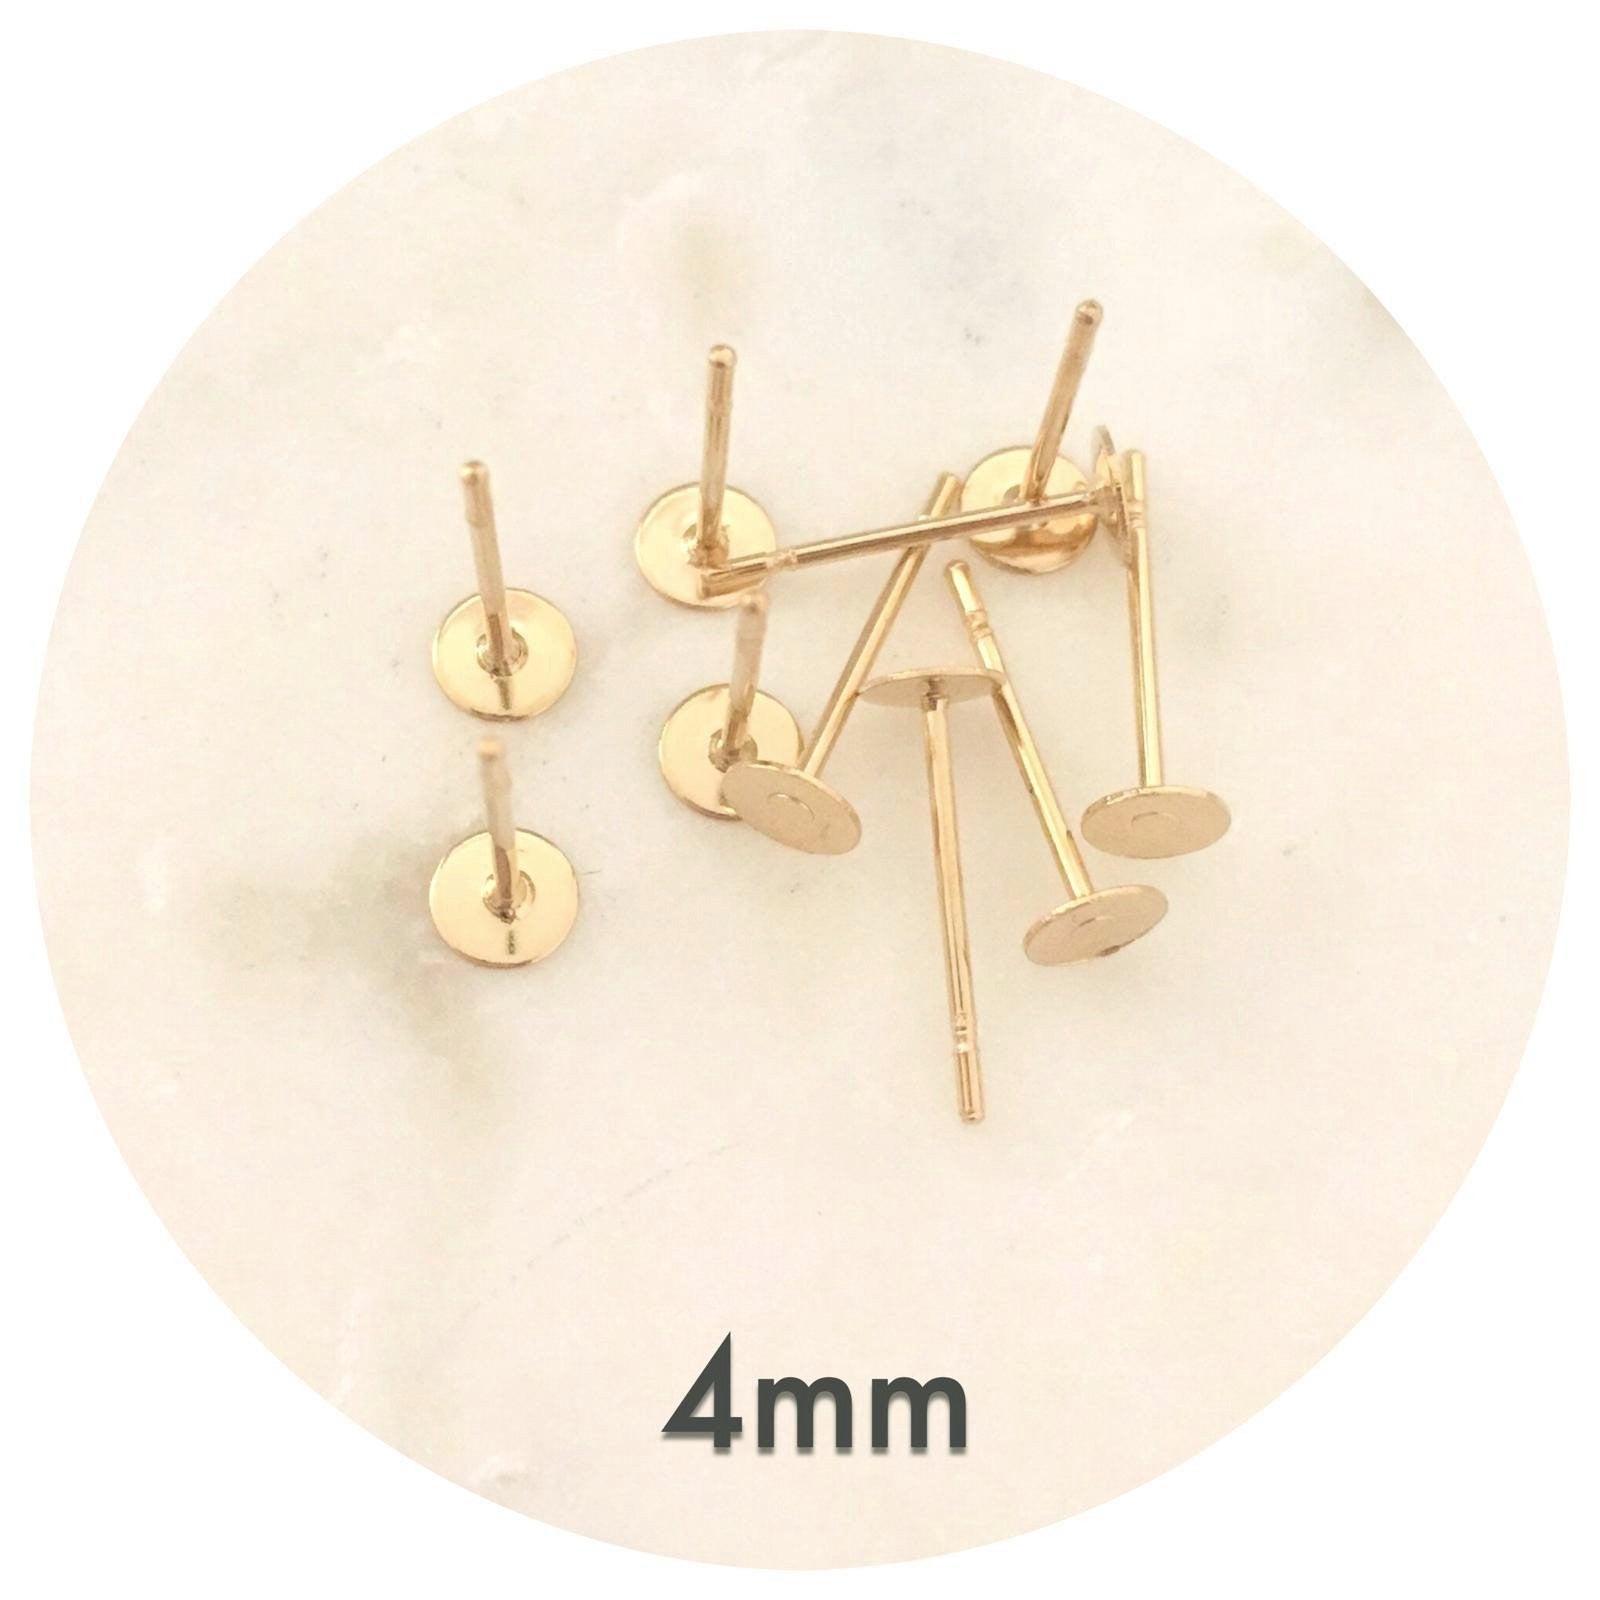 4mm Gold Stainless Steel Earring Stud Posts - 50 pcs